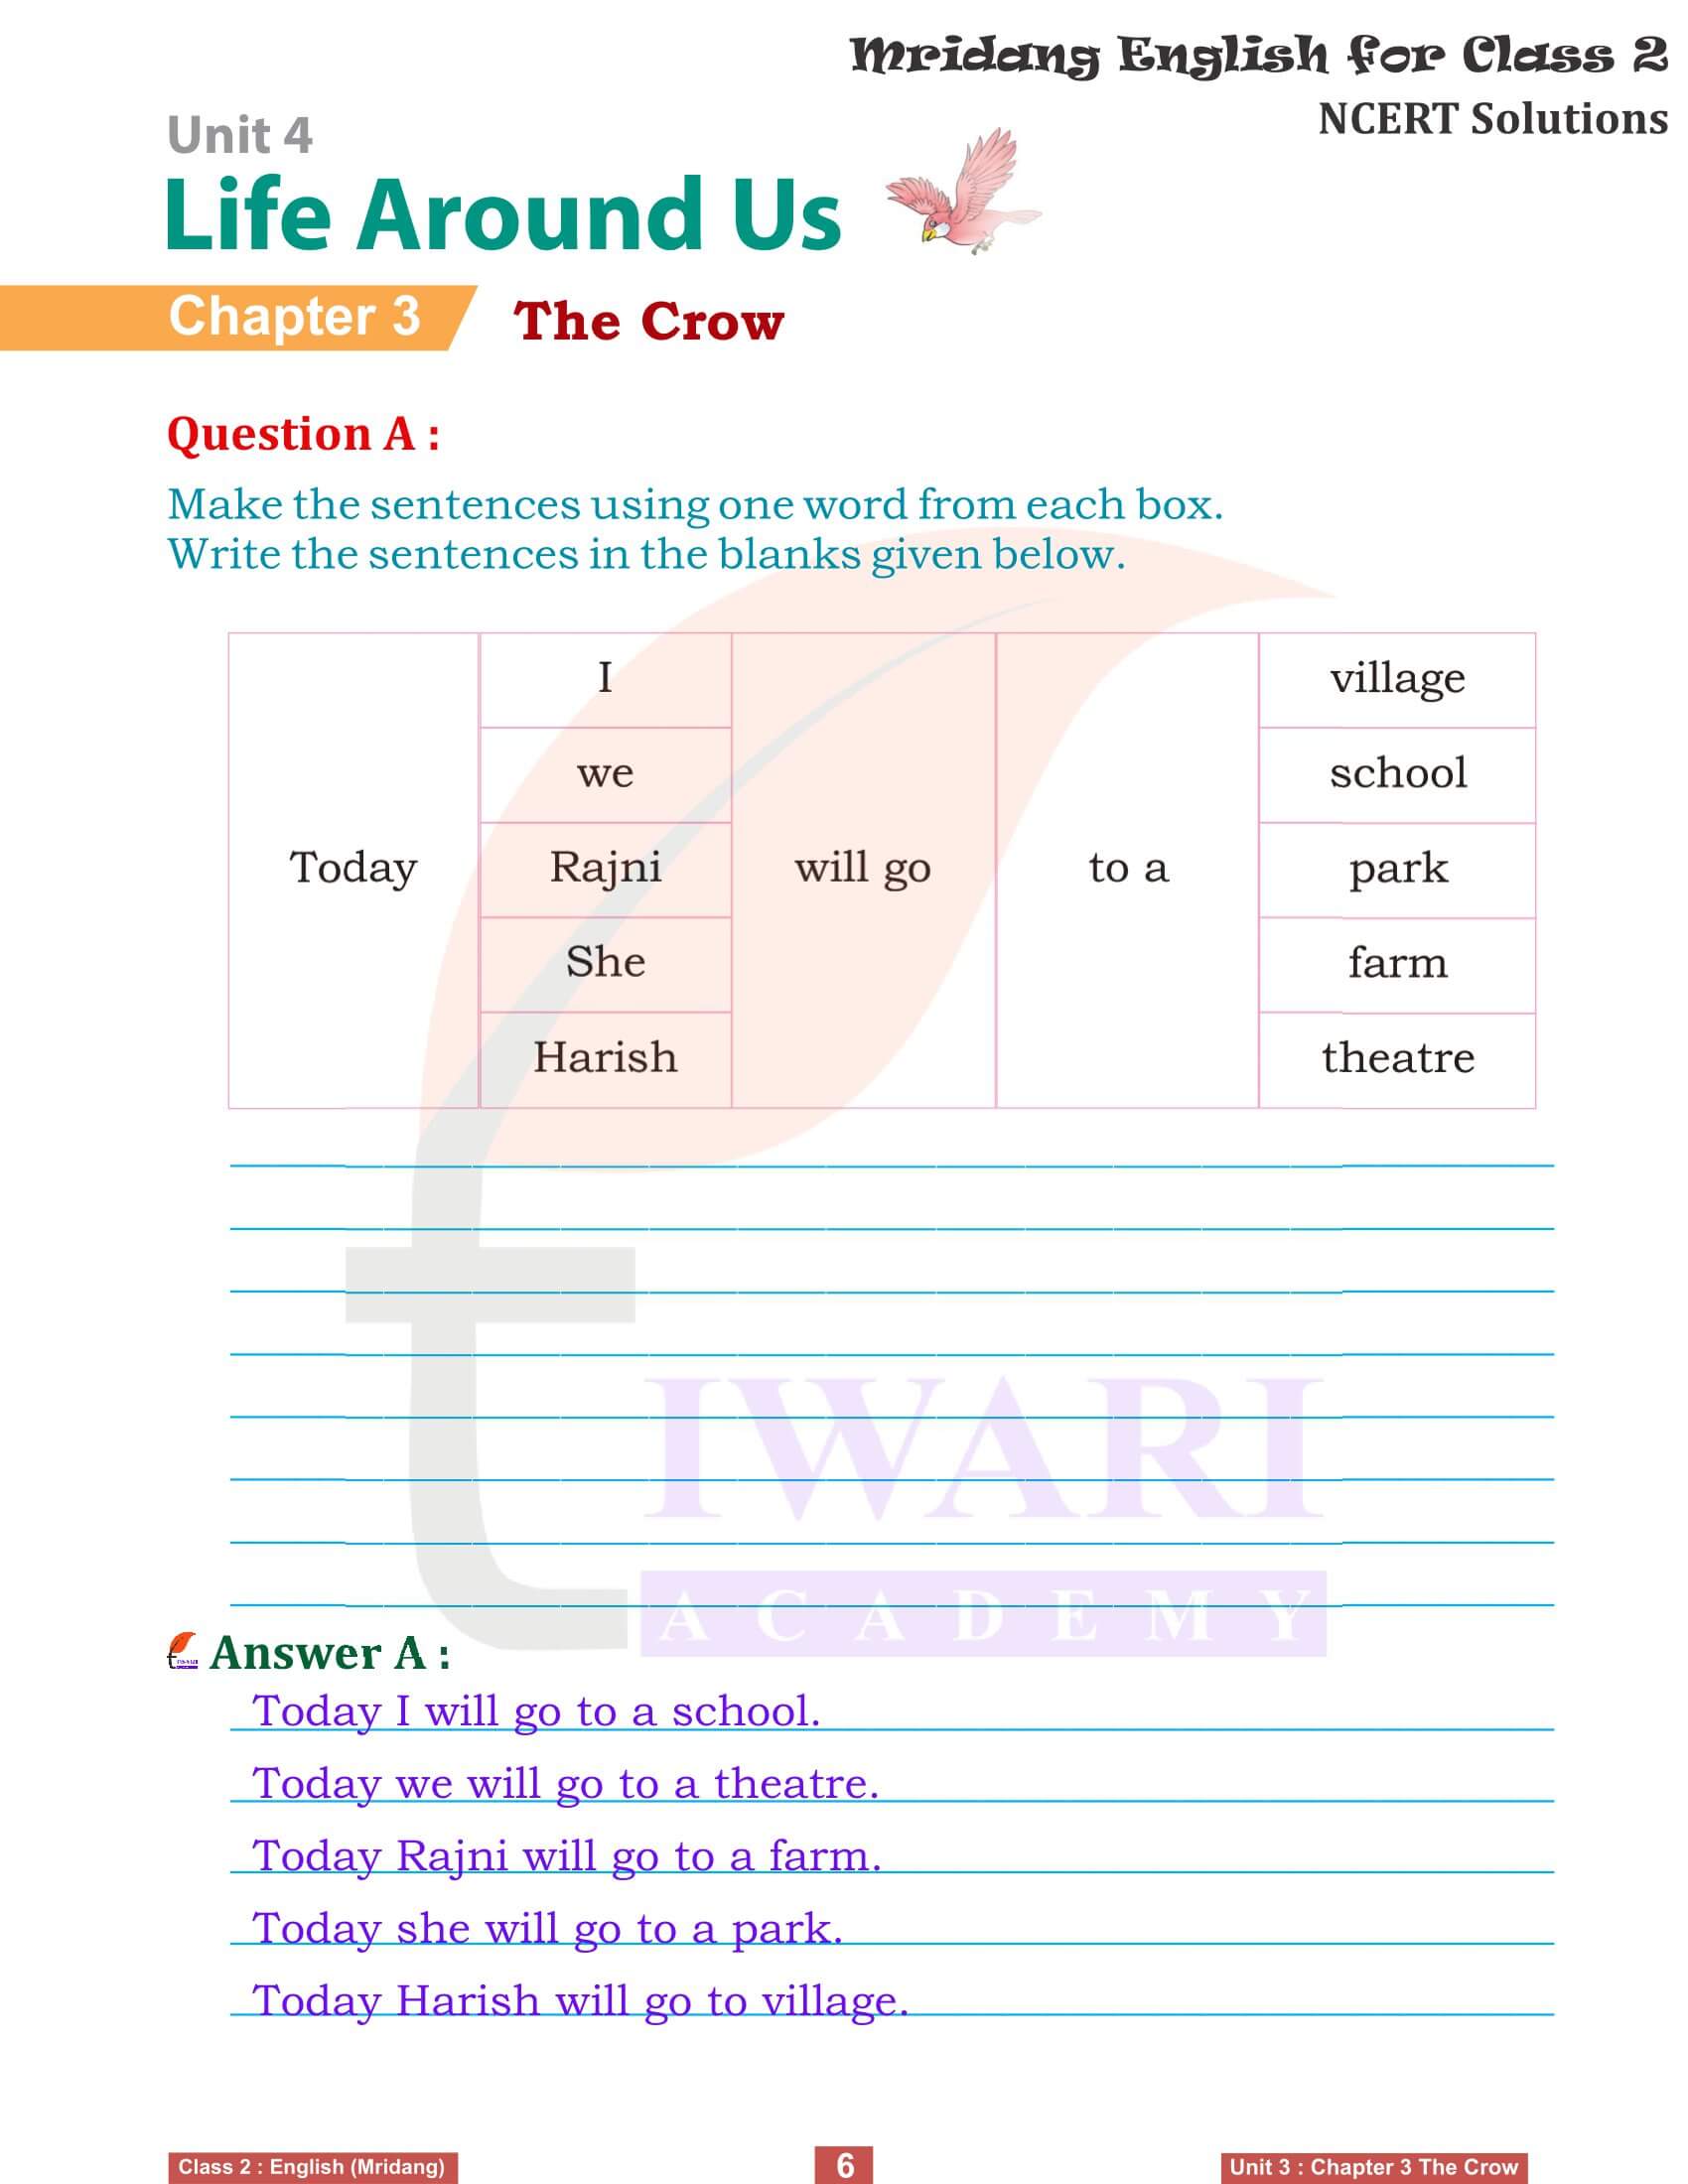 Class 2 English Mridang Unit 4 Life Around Us Chapter 3 The Crow Question Answers